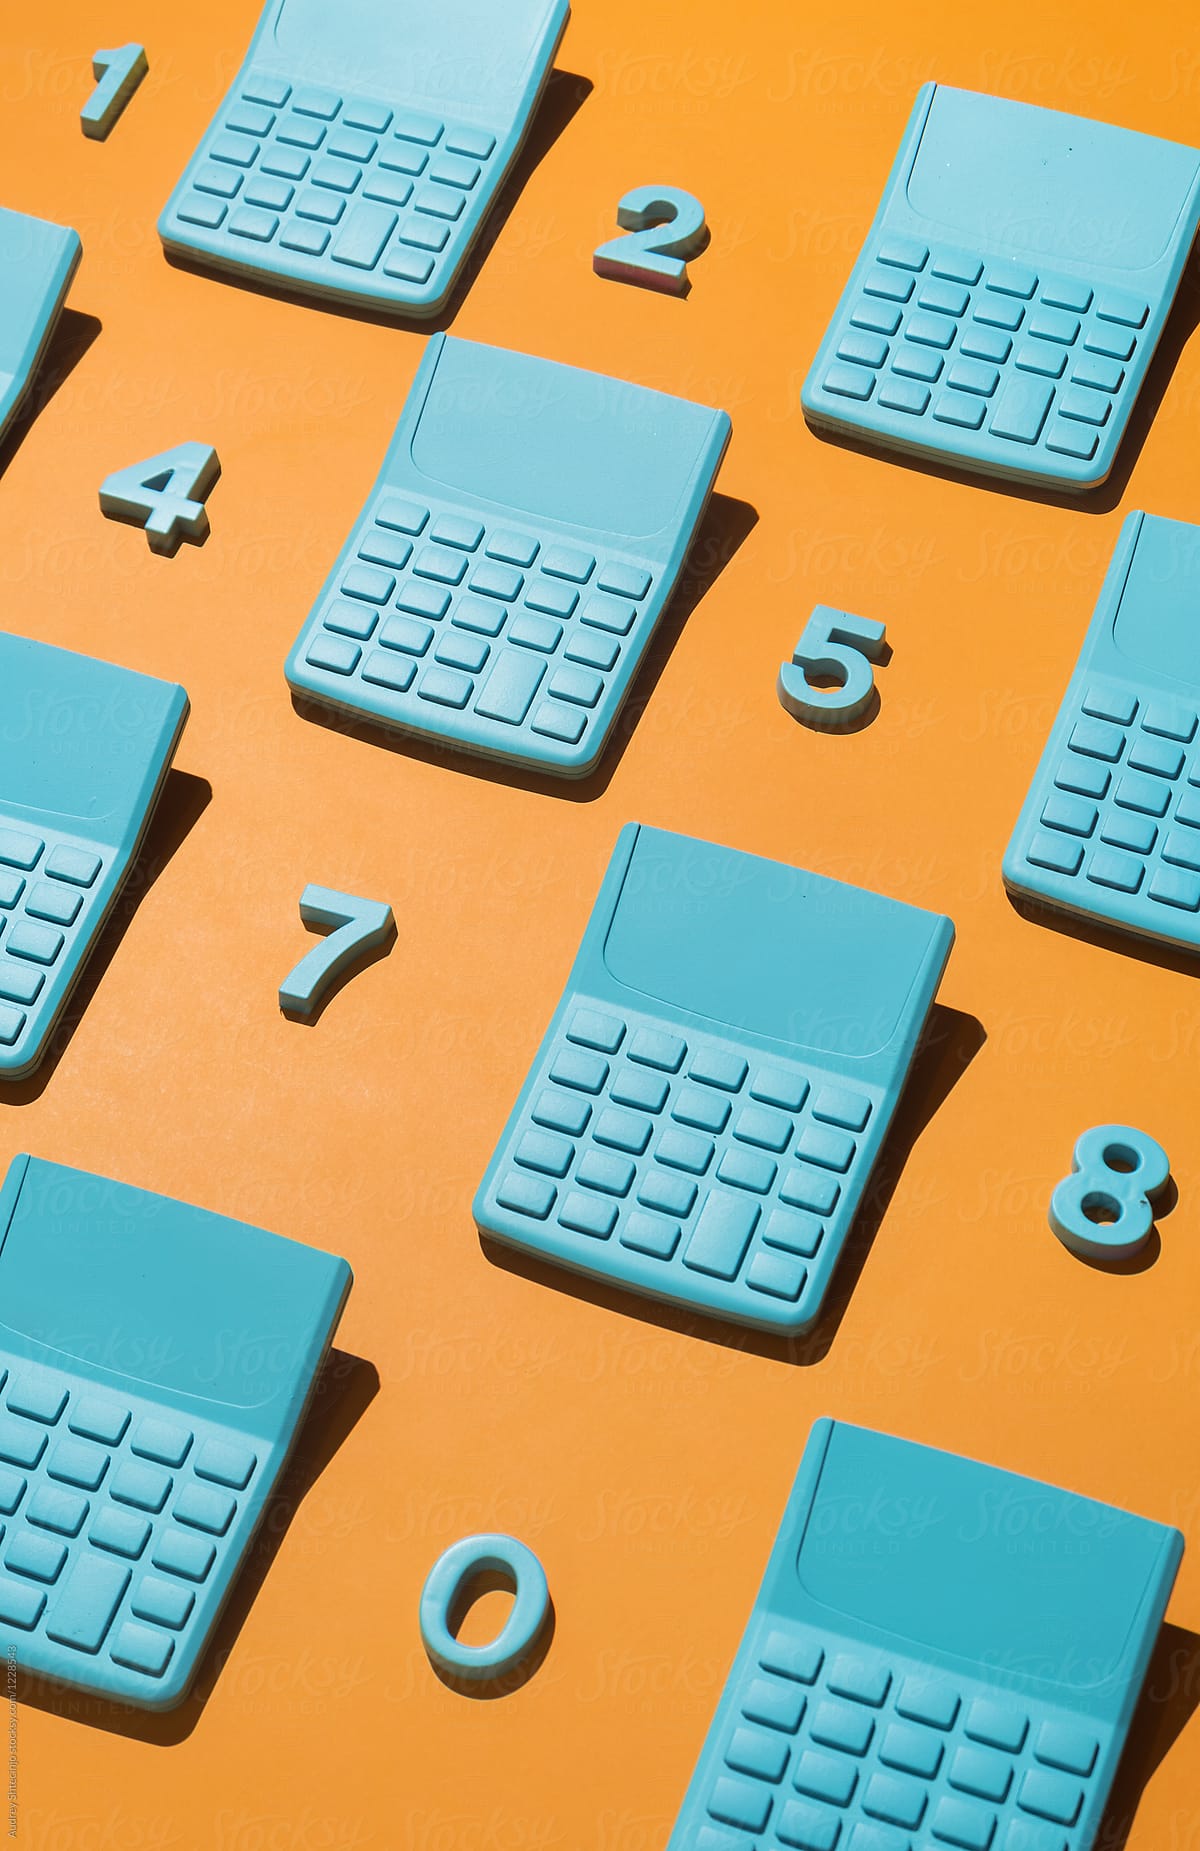 Blue pocket calculators with numbers on orange background.